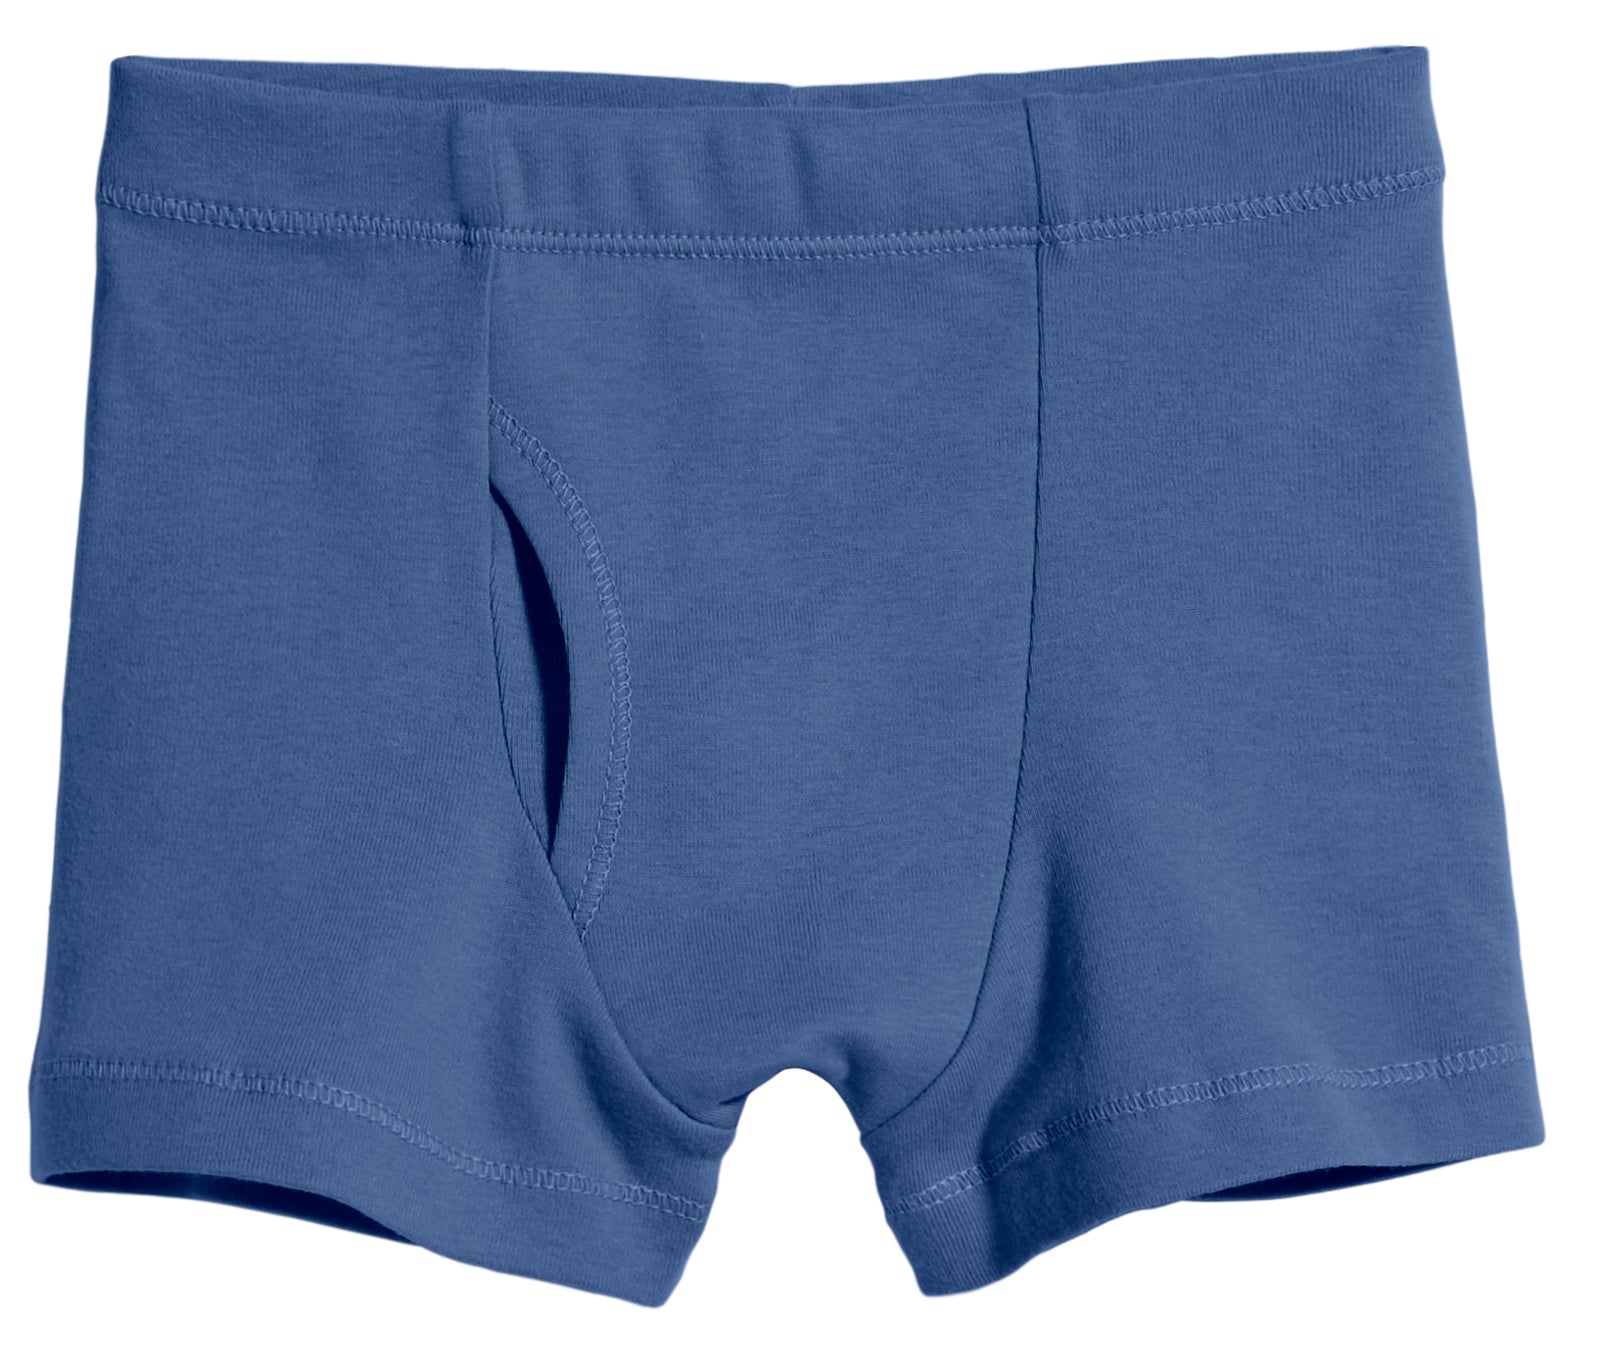 Grey Pack of two Essentials cotton-blend boxer briefs